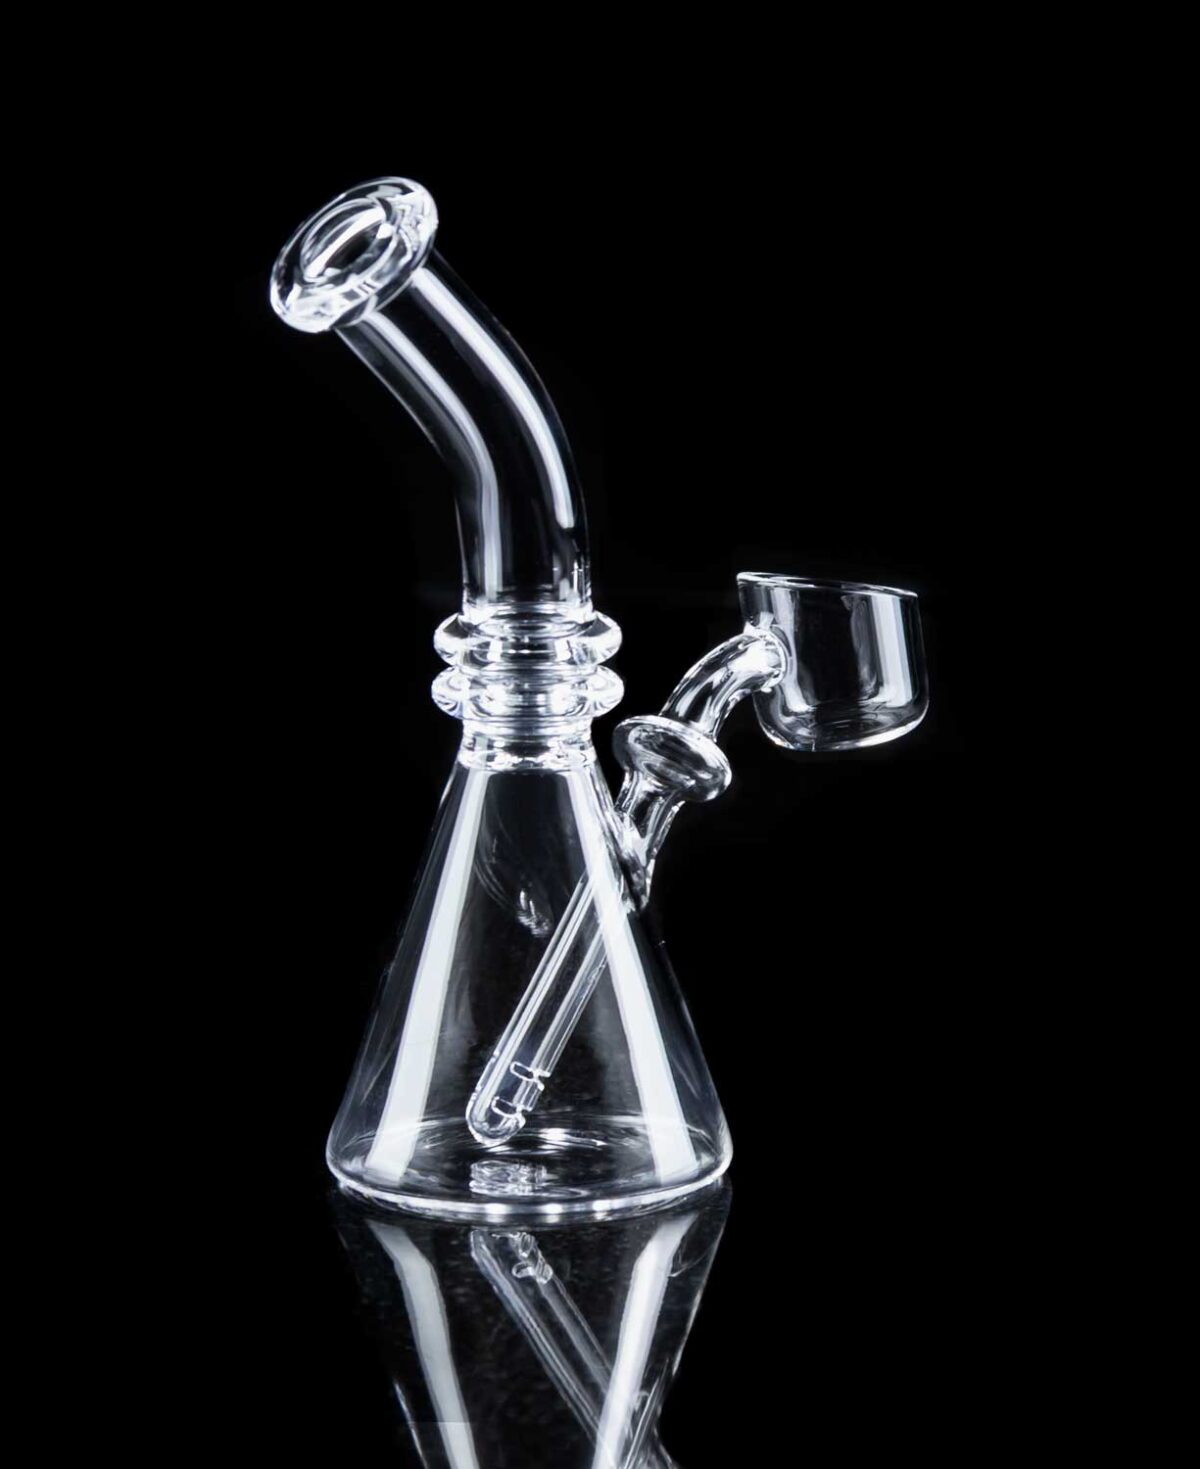 all quartz rig with fixe downstem and curved neck to reduce splashback